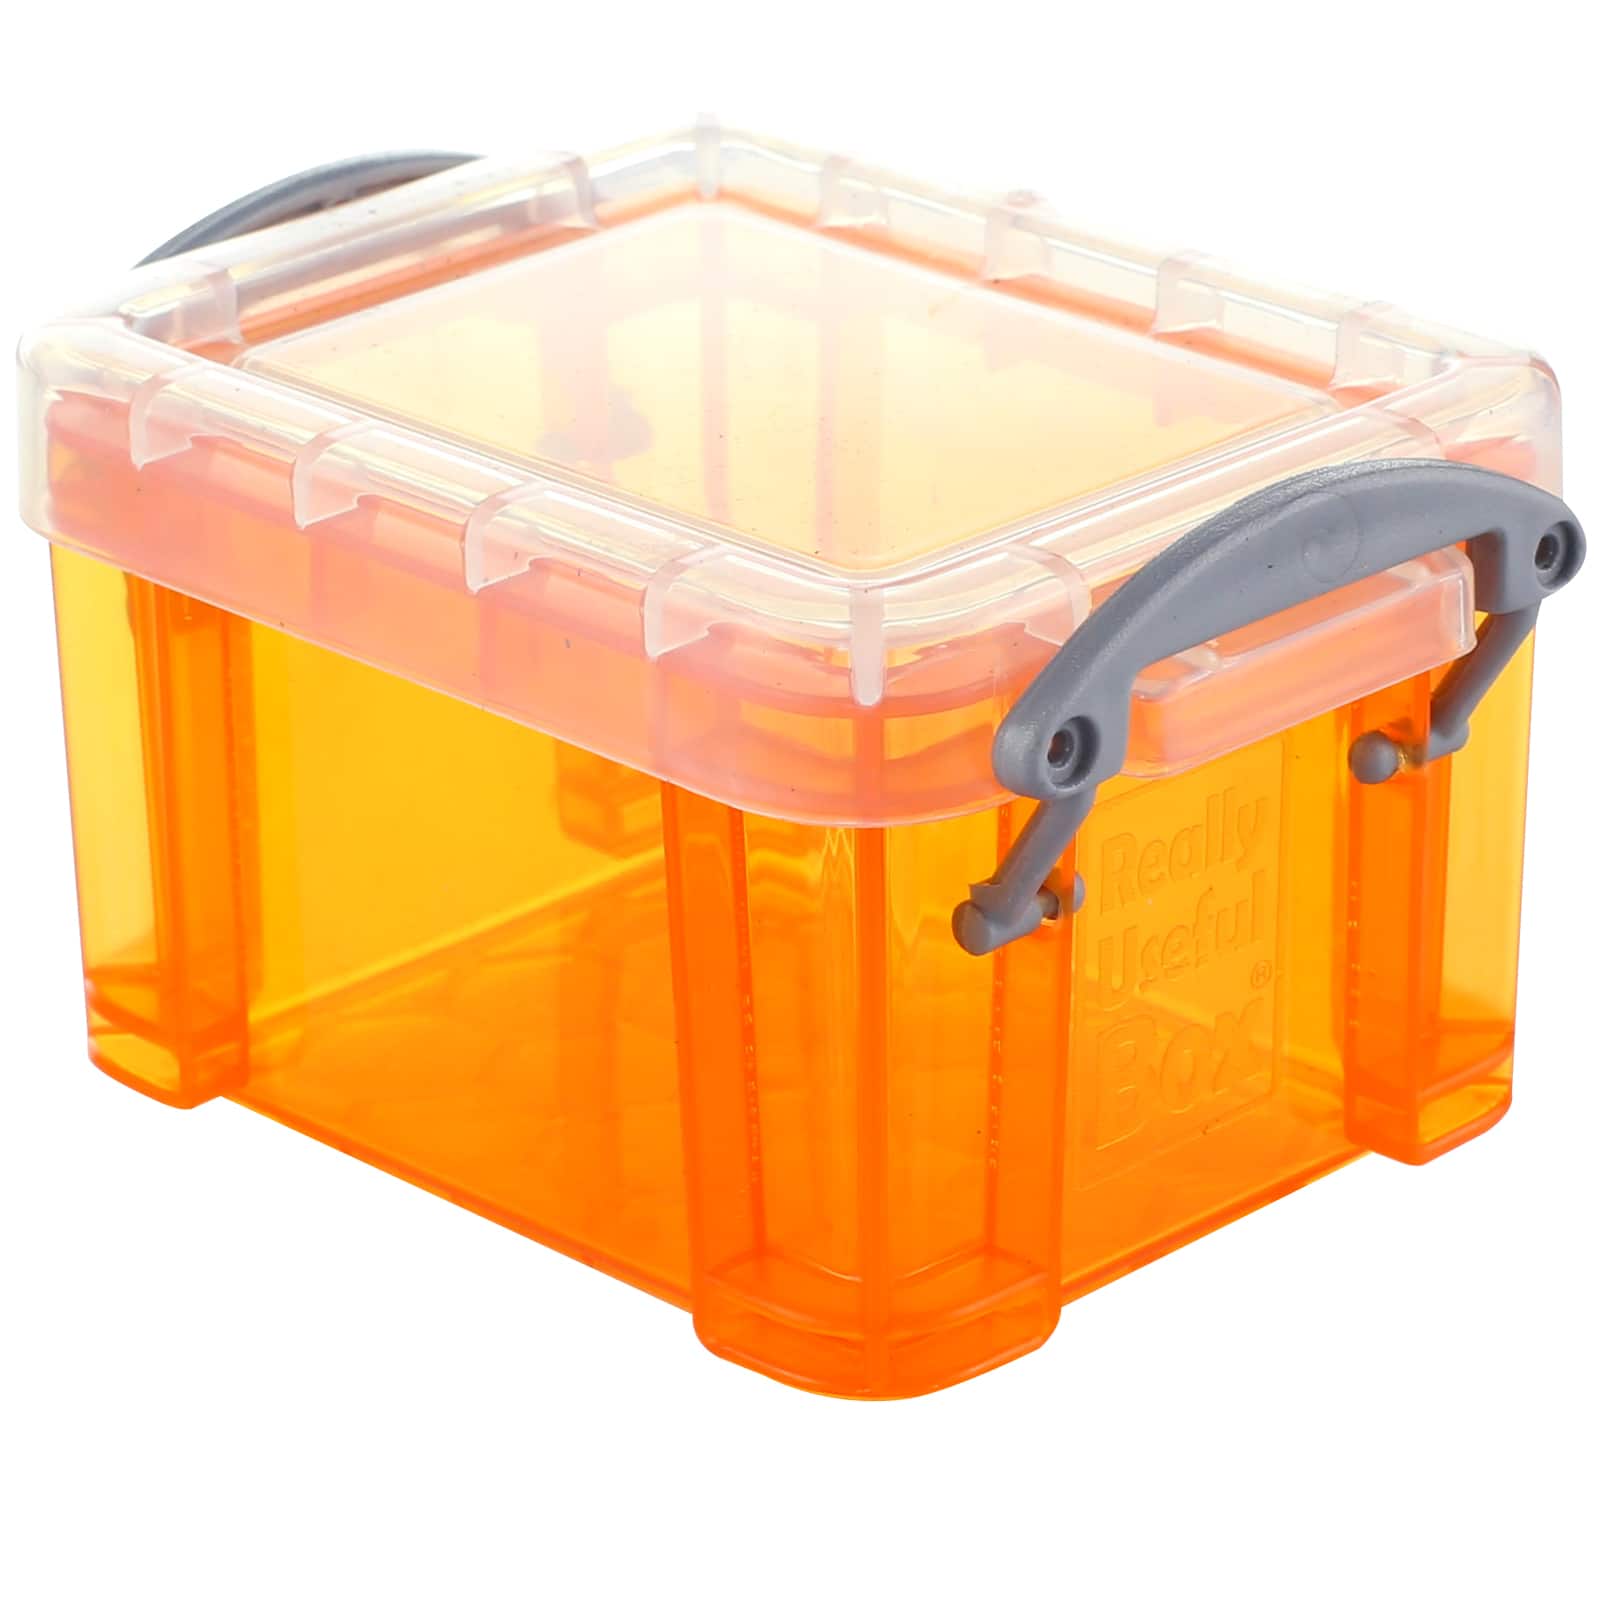  Really Useful Box 16x0.14 Litre Plastic Storage Box Organiser  Clear & Assorted : Home & Kitchen